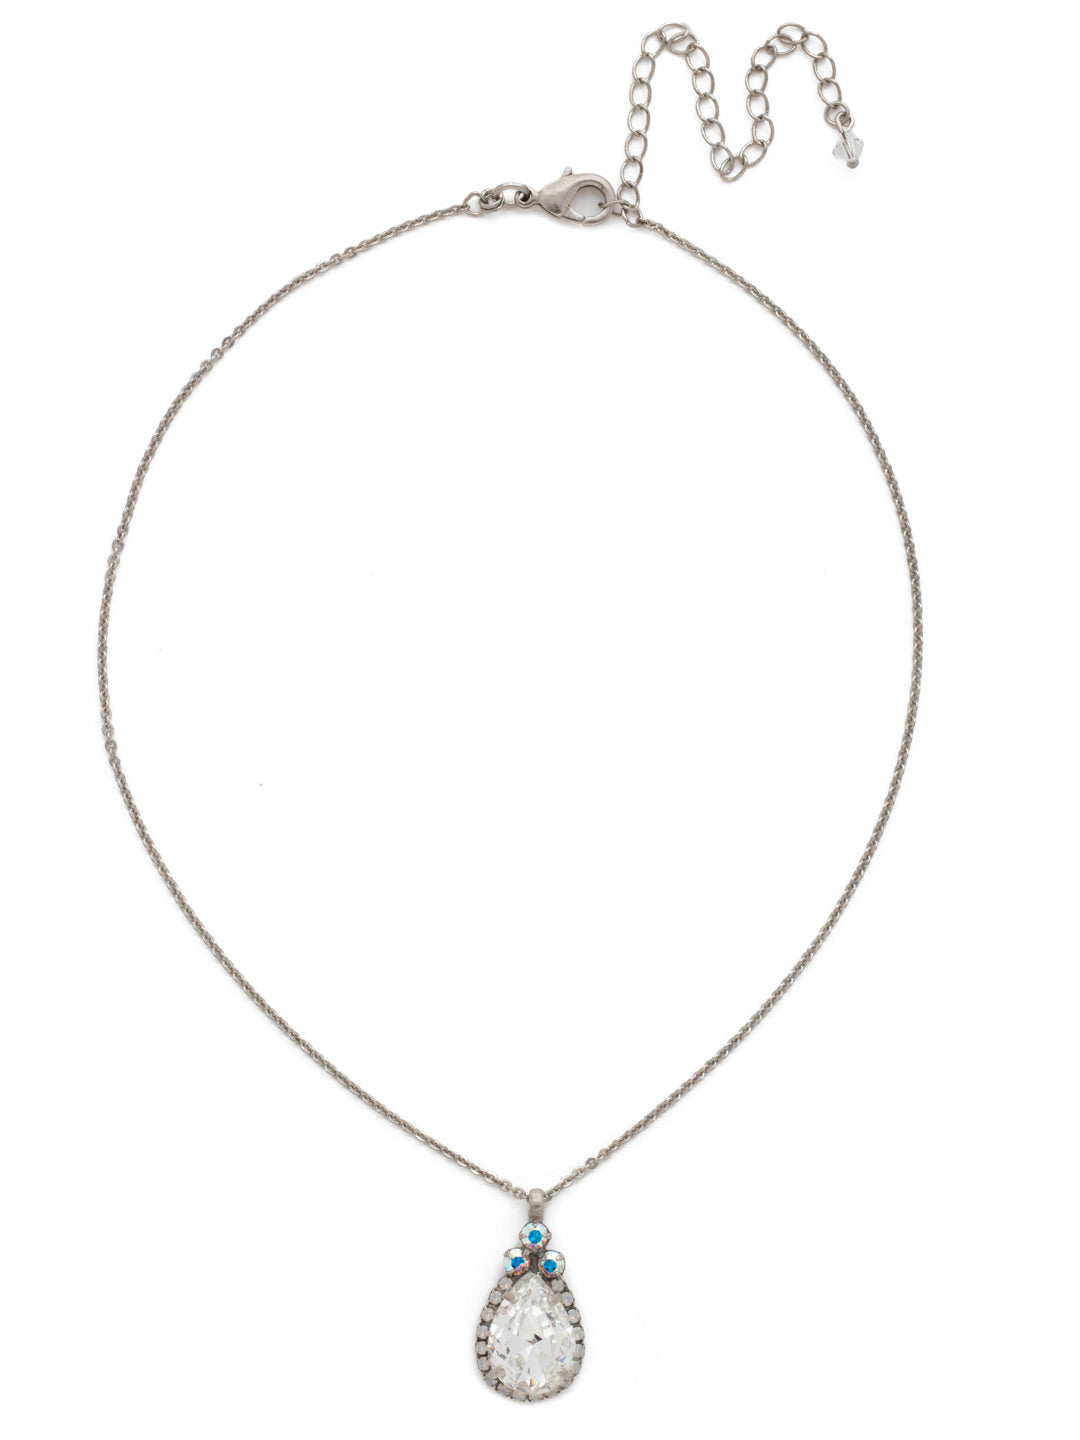 Sweet Sparkle Pendant Necklace - NCM19ASWBR - This dazzling pendant uses minimalism to maximize the glam for any outfit. Featuring a teardrop crystal surrounded by a row of round gemstones, this pendant is sure to sparkle on any occasion.